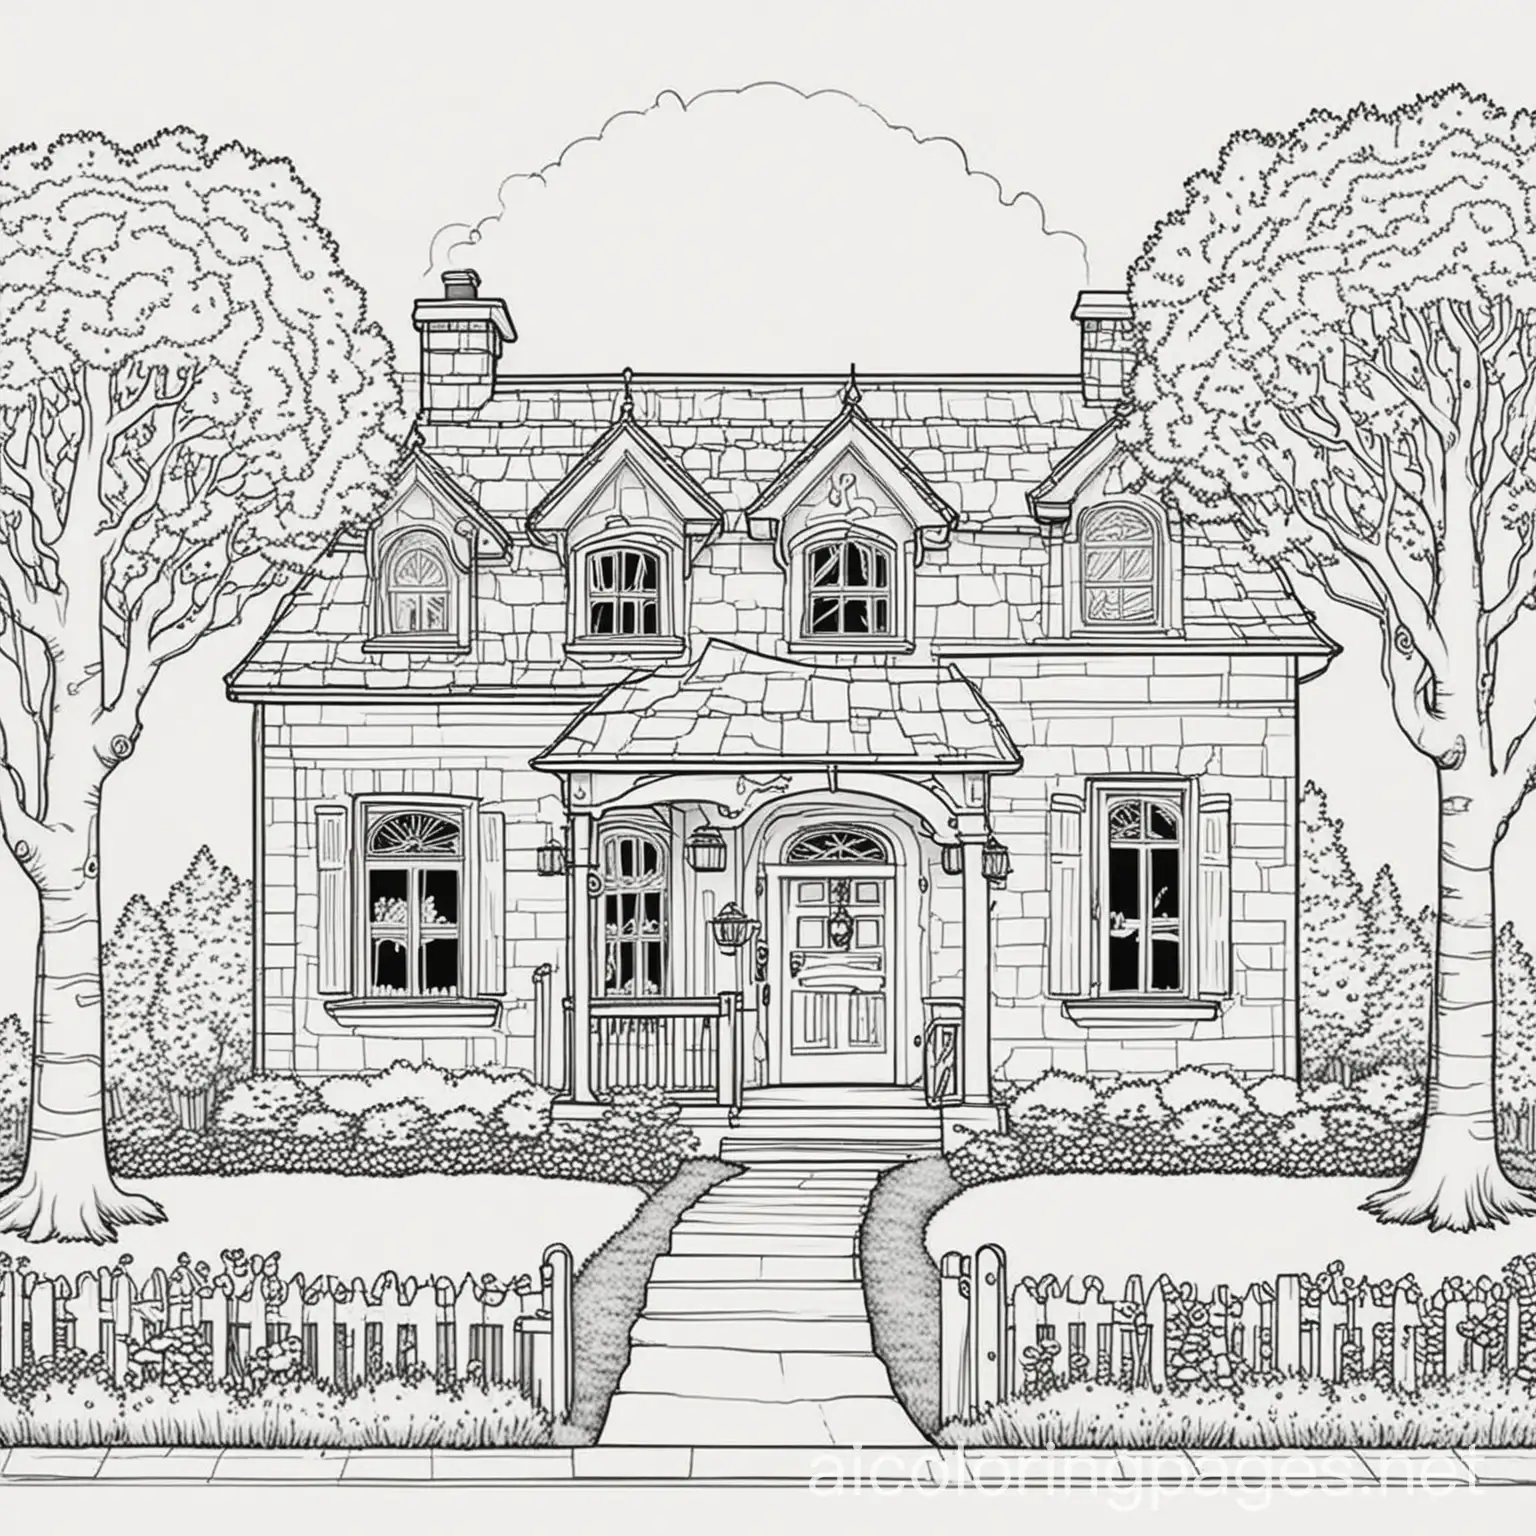 Simple-Line-Art-House-Coloring-Page-for-Kids